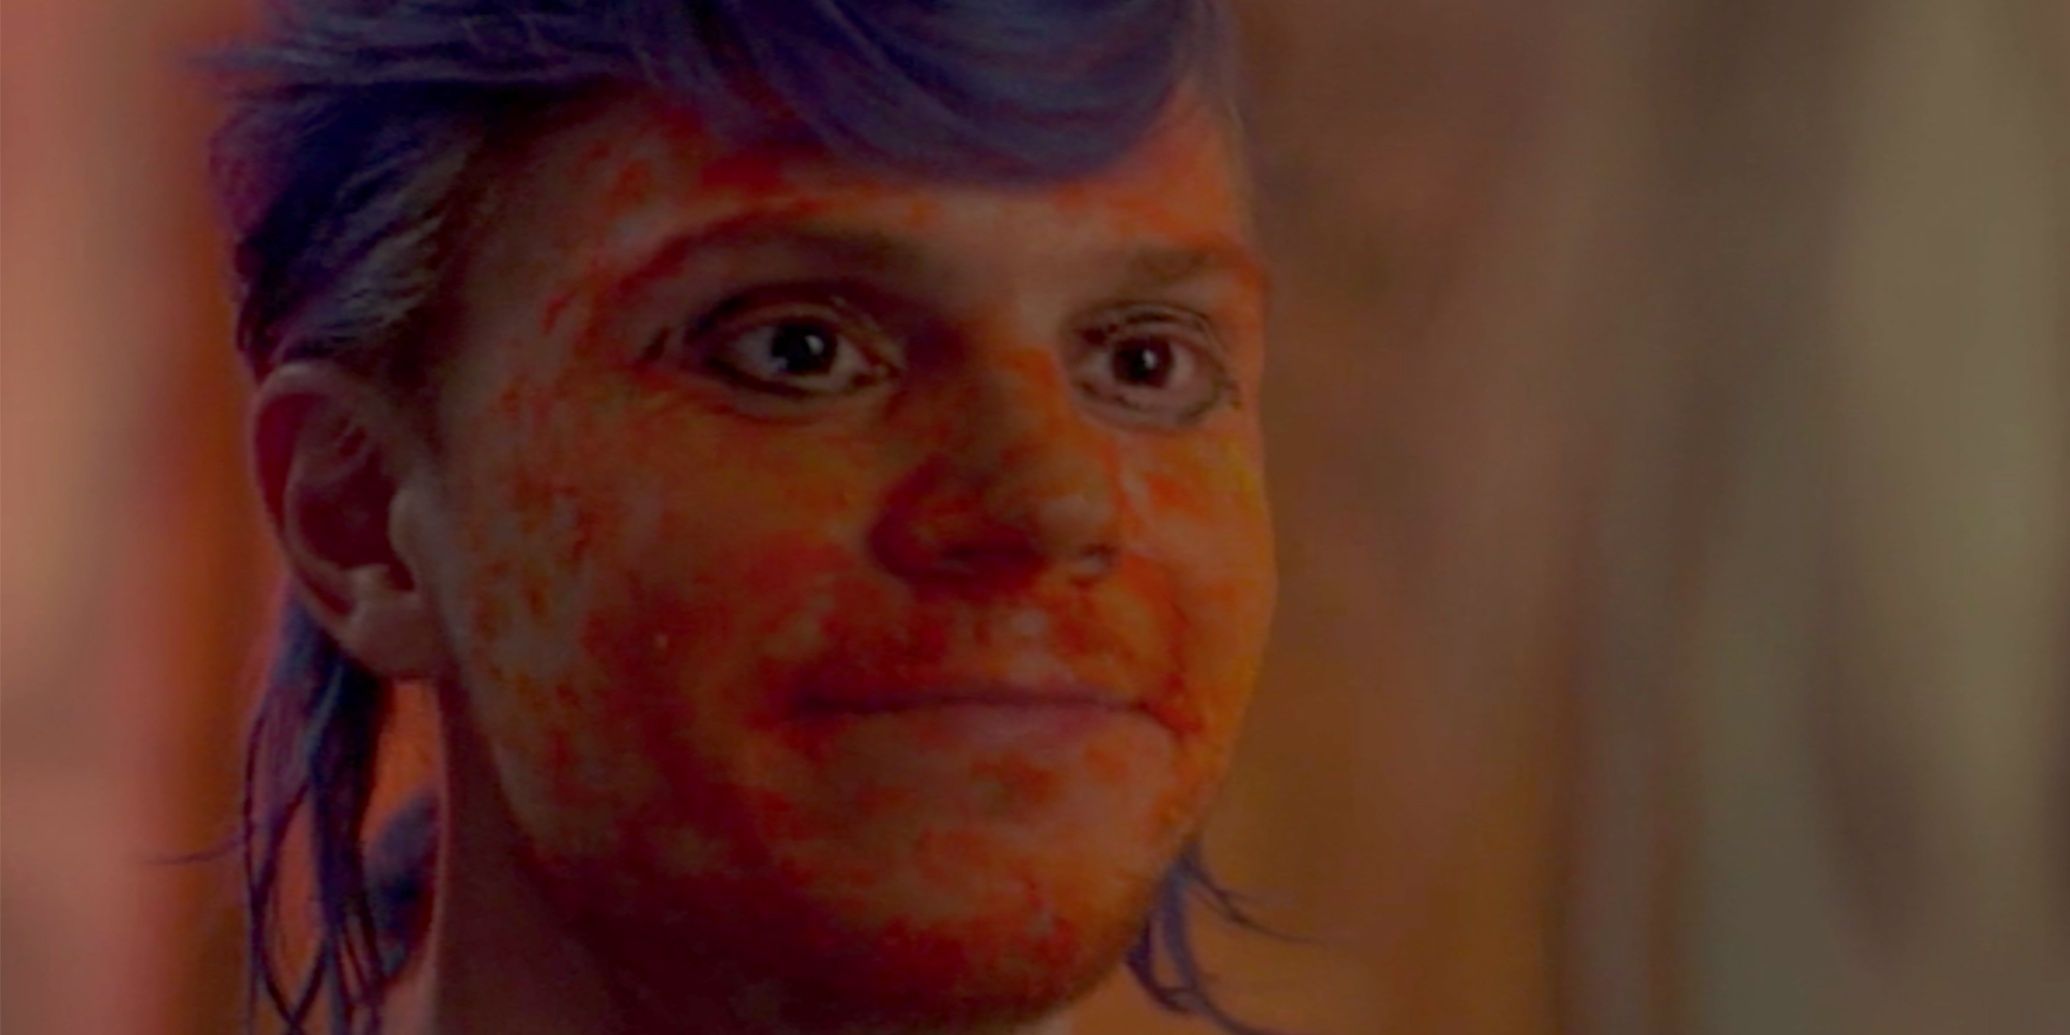 Evan Peters as Kai in 'American Horror Story: Cult.'  He has blue hair and Cheeto dust on his face, and looks to the right with a smile.